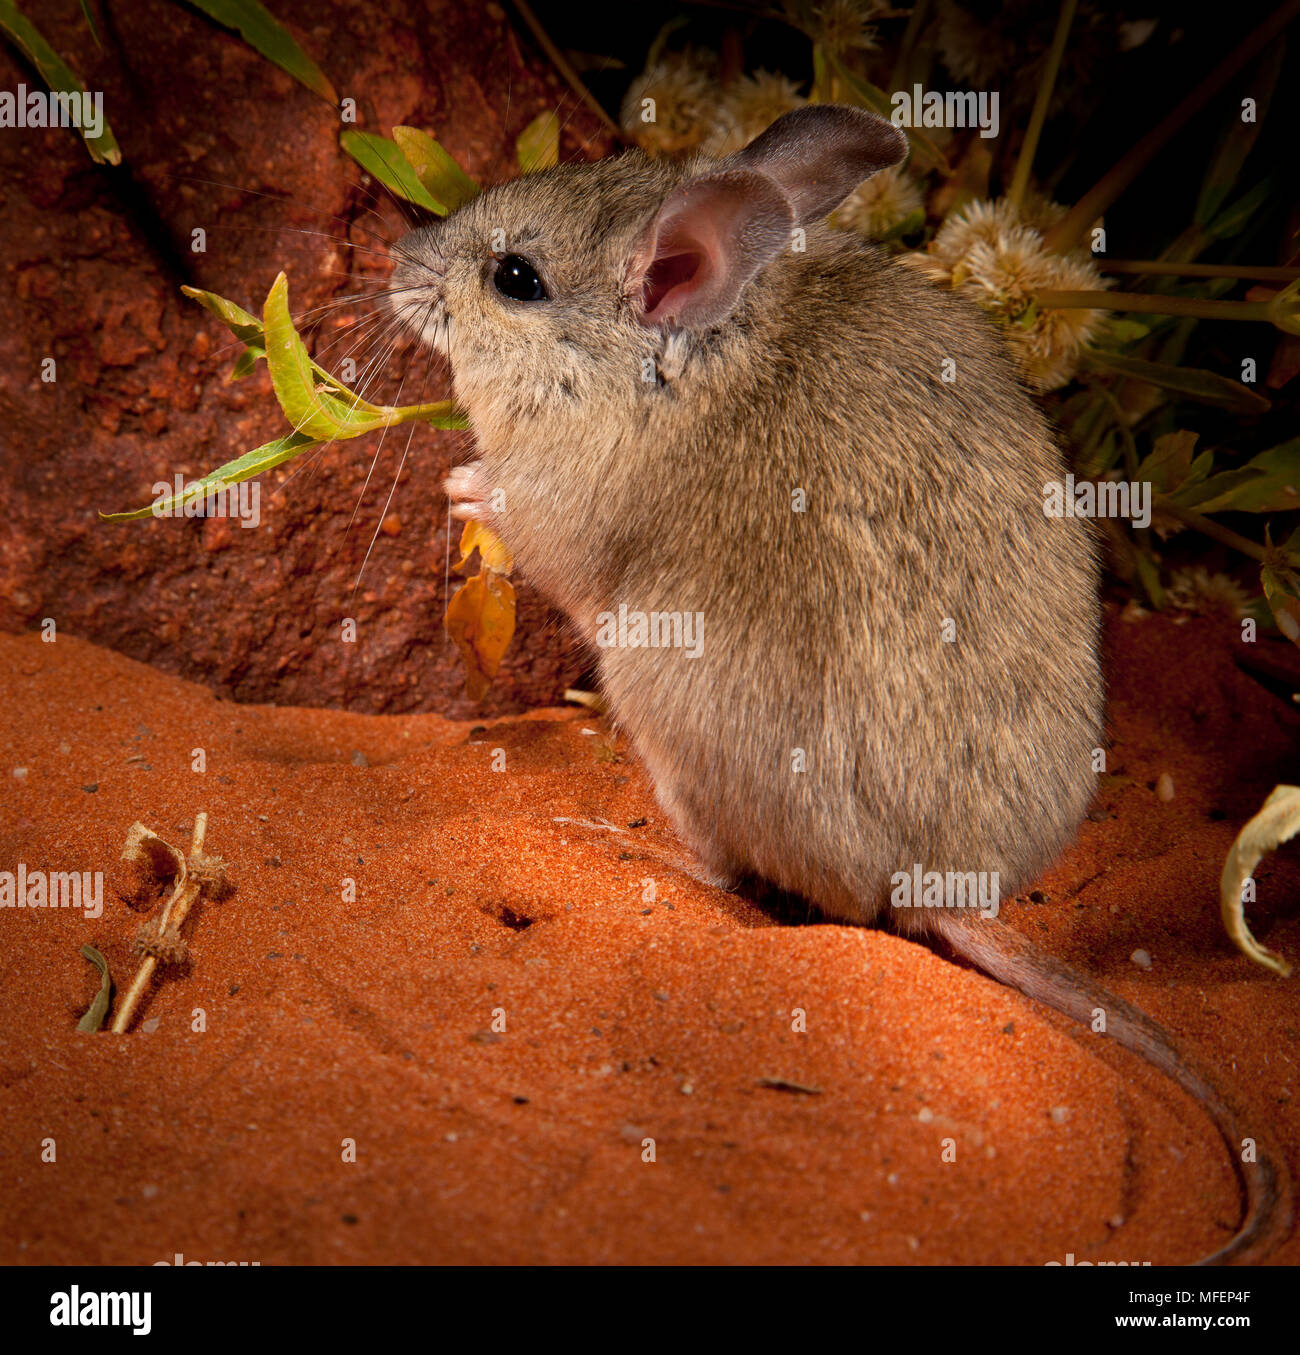 Plains Mouse (Pseudomys australis), Fam. Muridae, Rodentia, Animal was trapped and released during fauna survey, Andado Station, Northern Territory, A Stock Photo